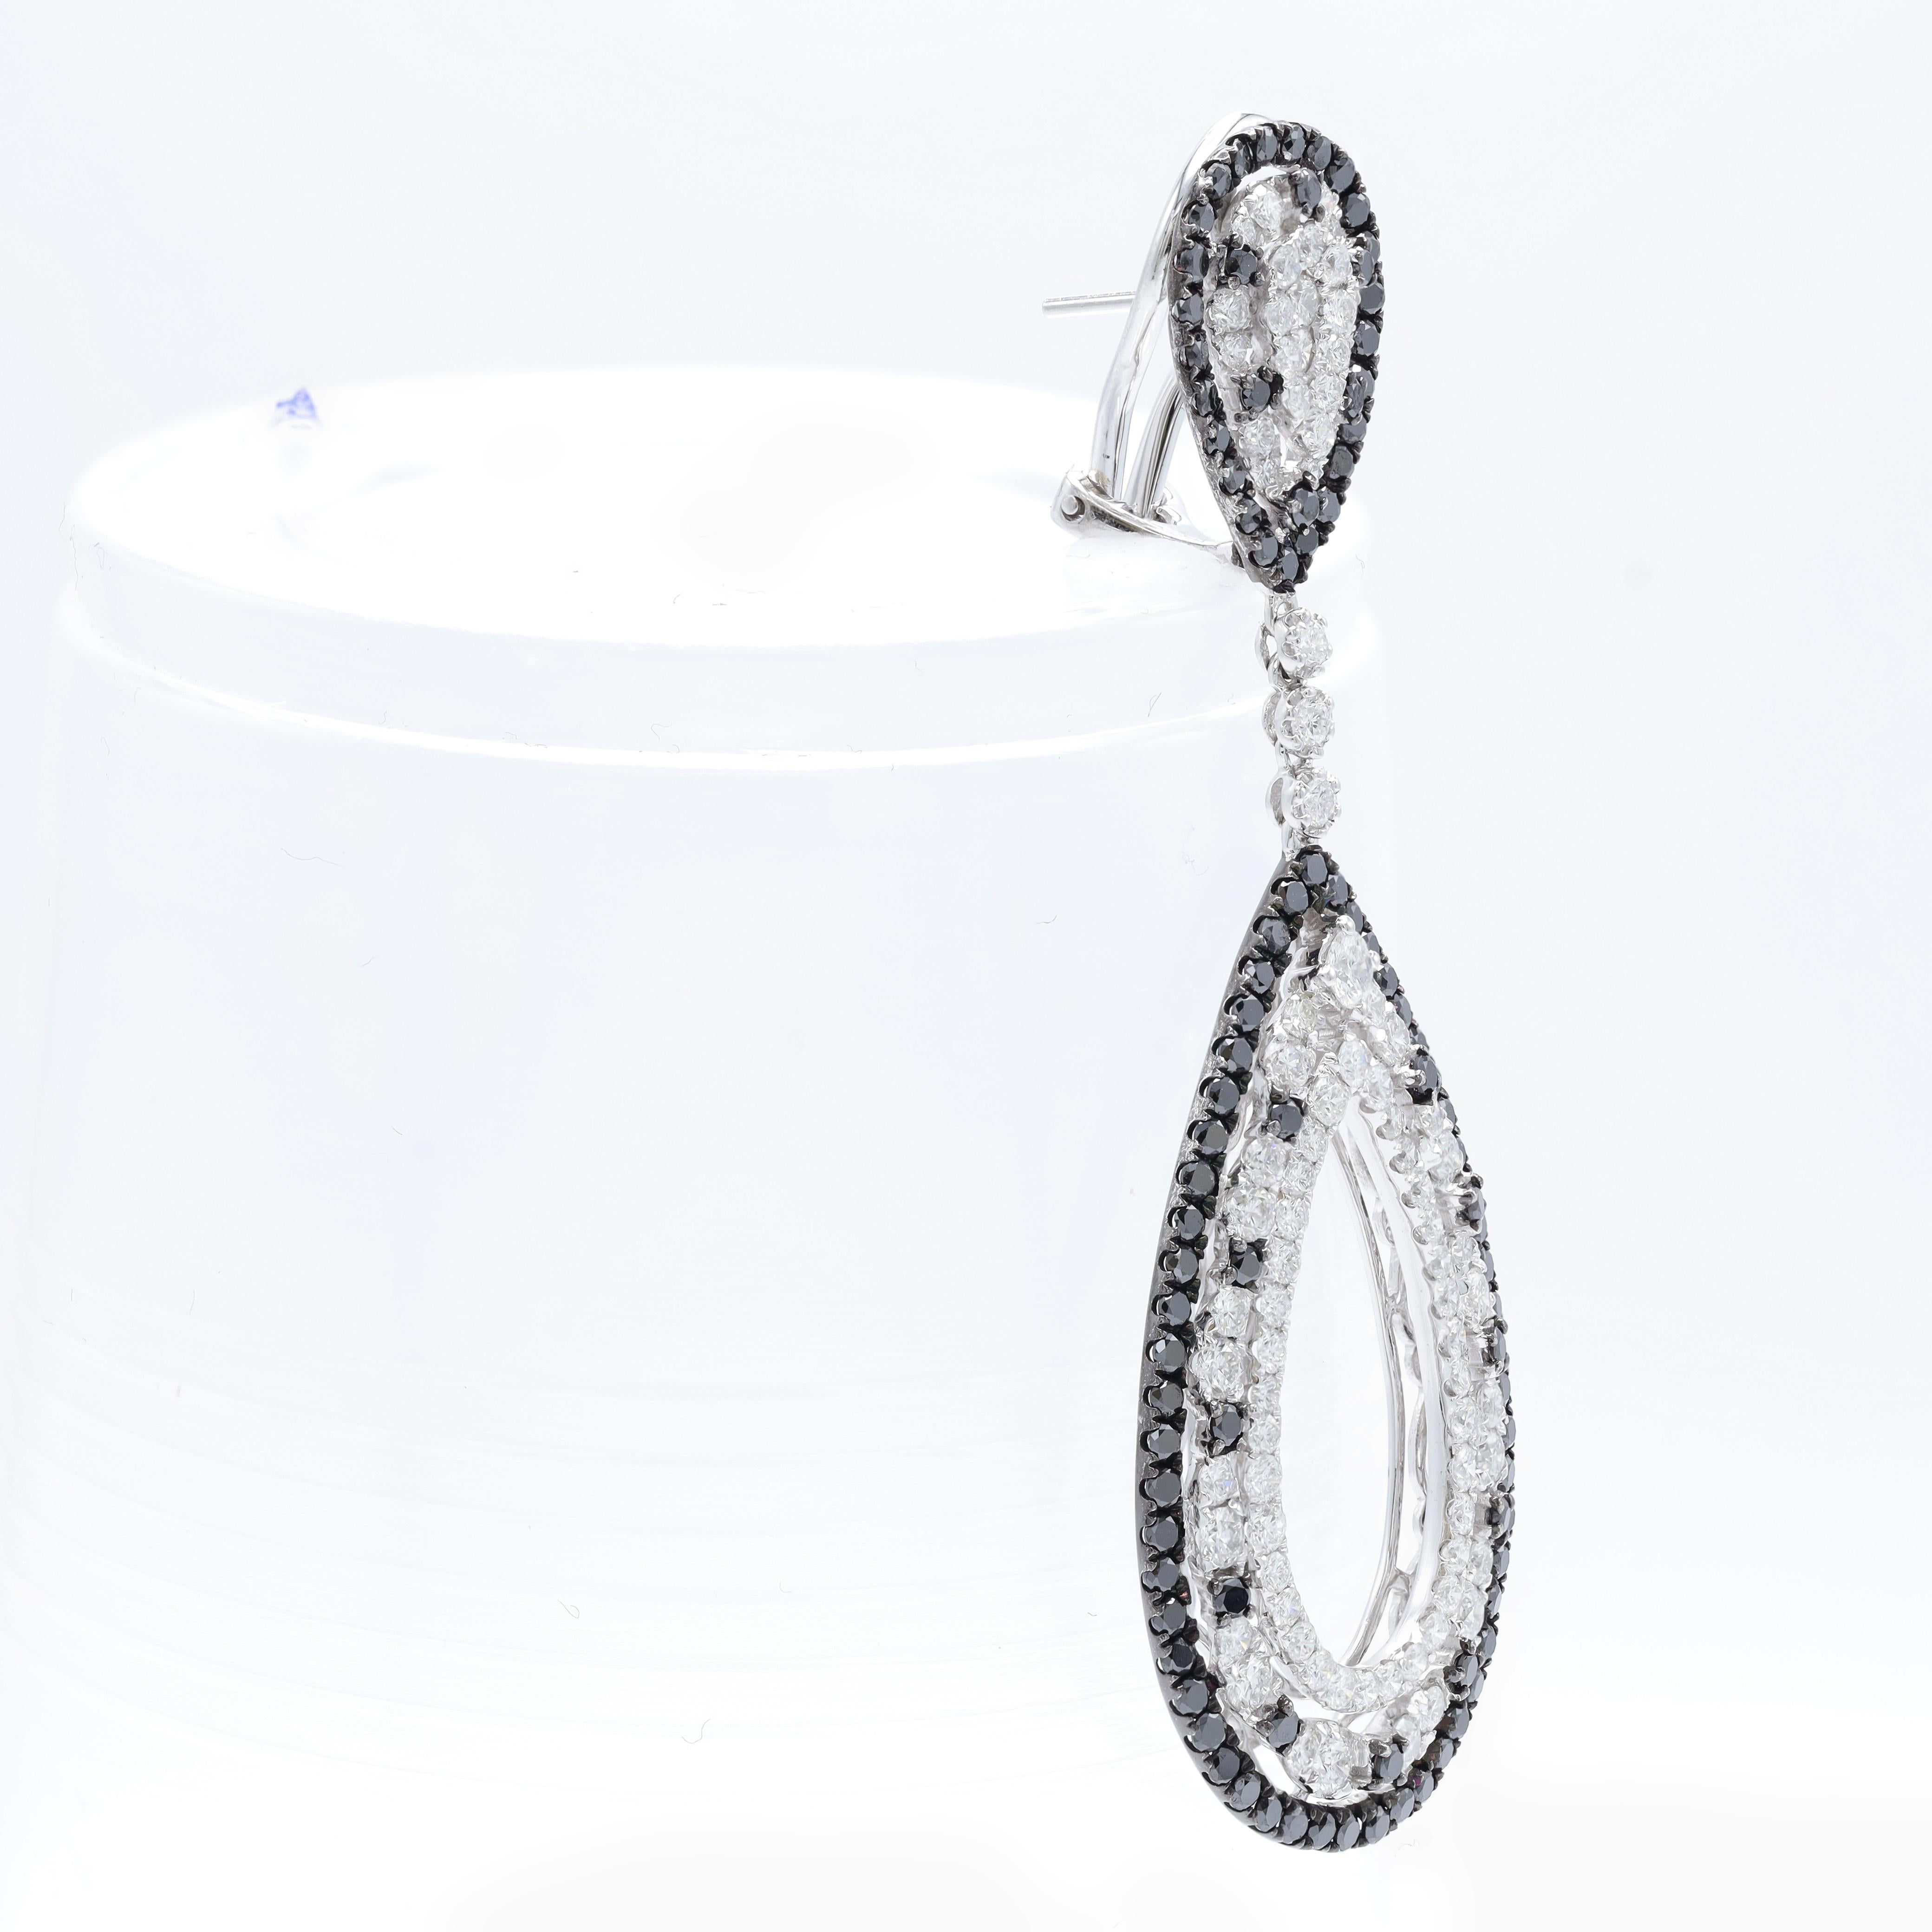 18 kt white gold diamond earring adorned with multiple drop shaped rings adorned with 7.31 cts tw of black and white diamonds.
Diana M. is a leading supplier of top-quality fine jewelry for over 35 years.
Diana M is one-stop shop for all your